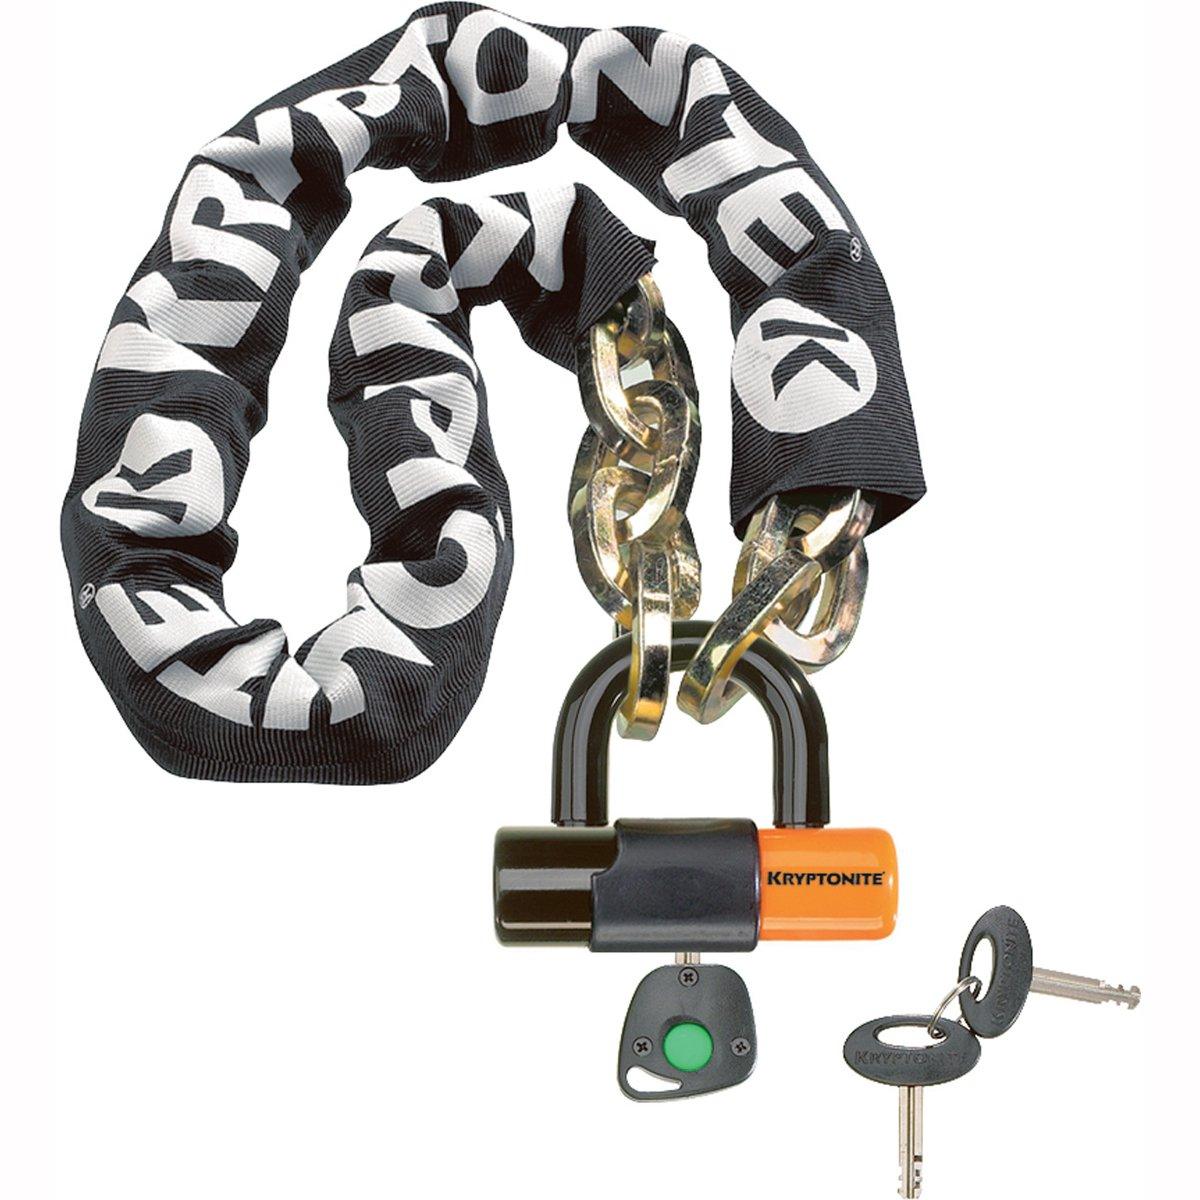 Kryptonite New York Chain with series 4 Disc Lock - 3FT 3IN (100cm)